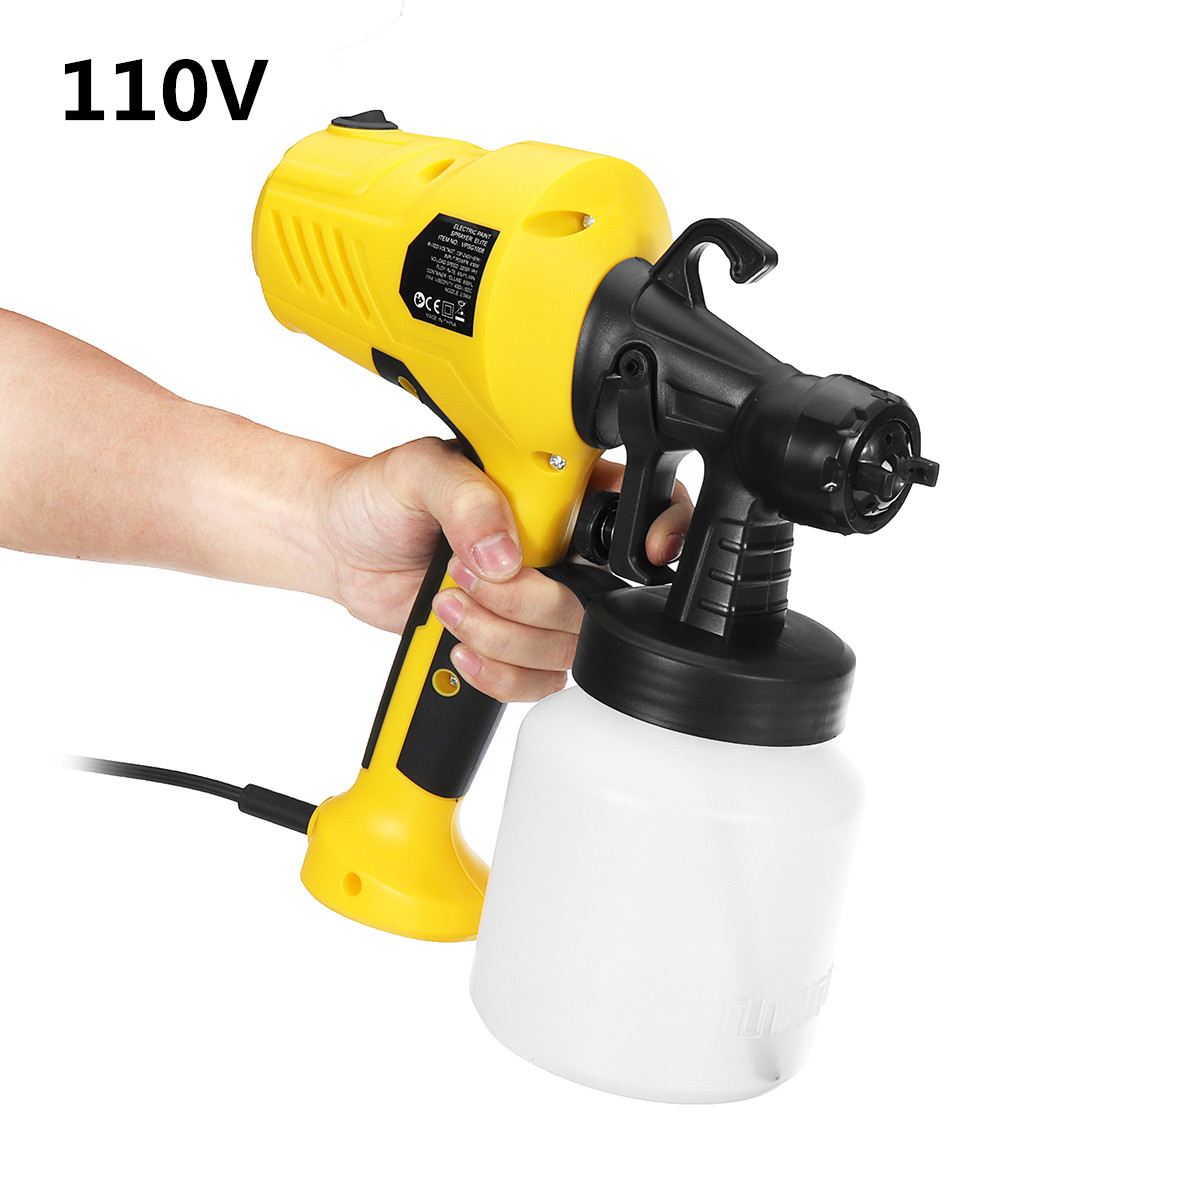 600W Electric Spray Paint Sprayer For Cars Wood Furniture Wall Woodworking 53